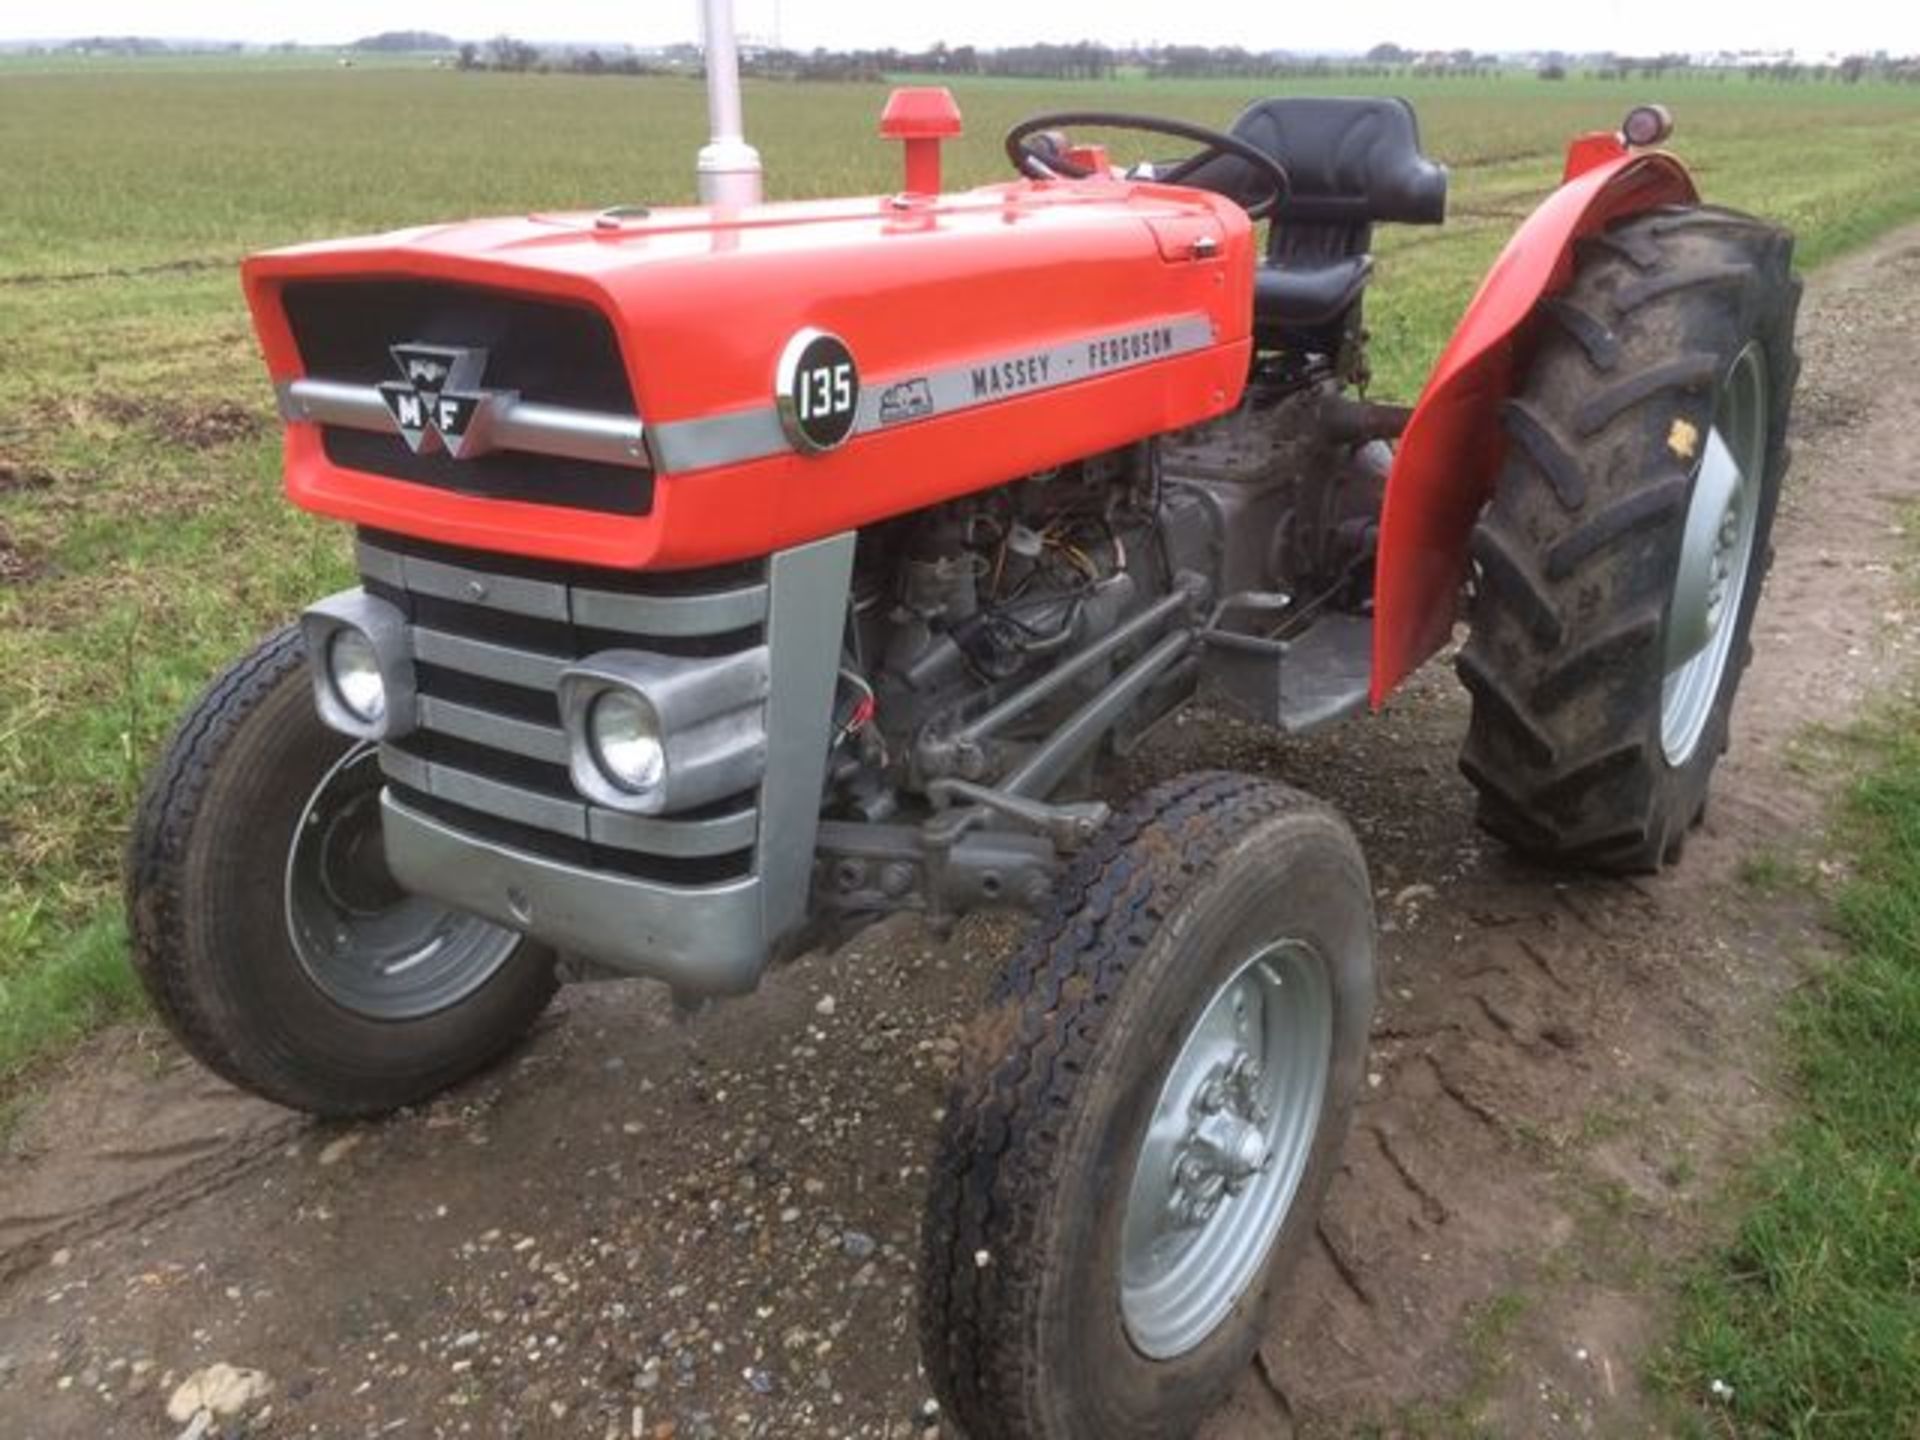 MASSEY FERGUSON Age unknown production ran between 1965 and 1975 this example shows 4107 hours